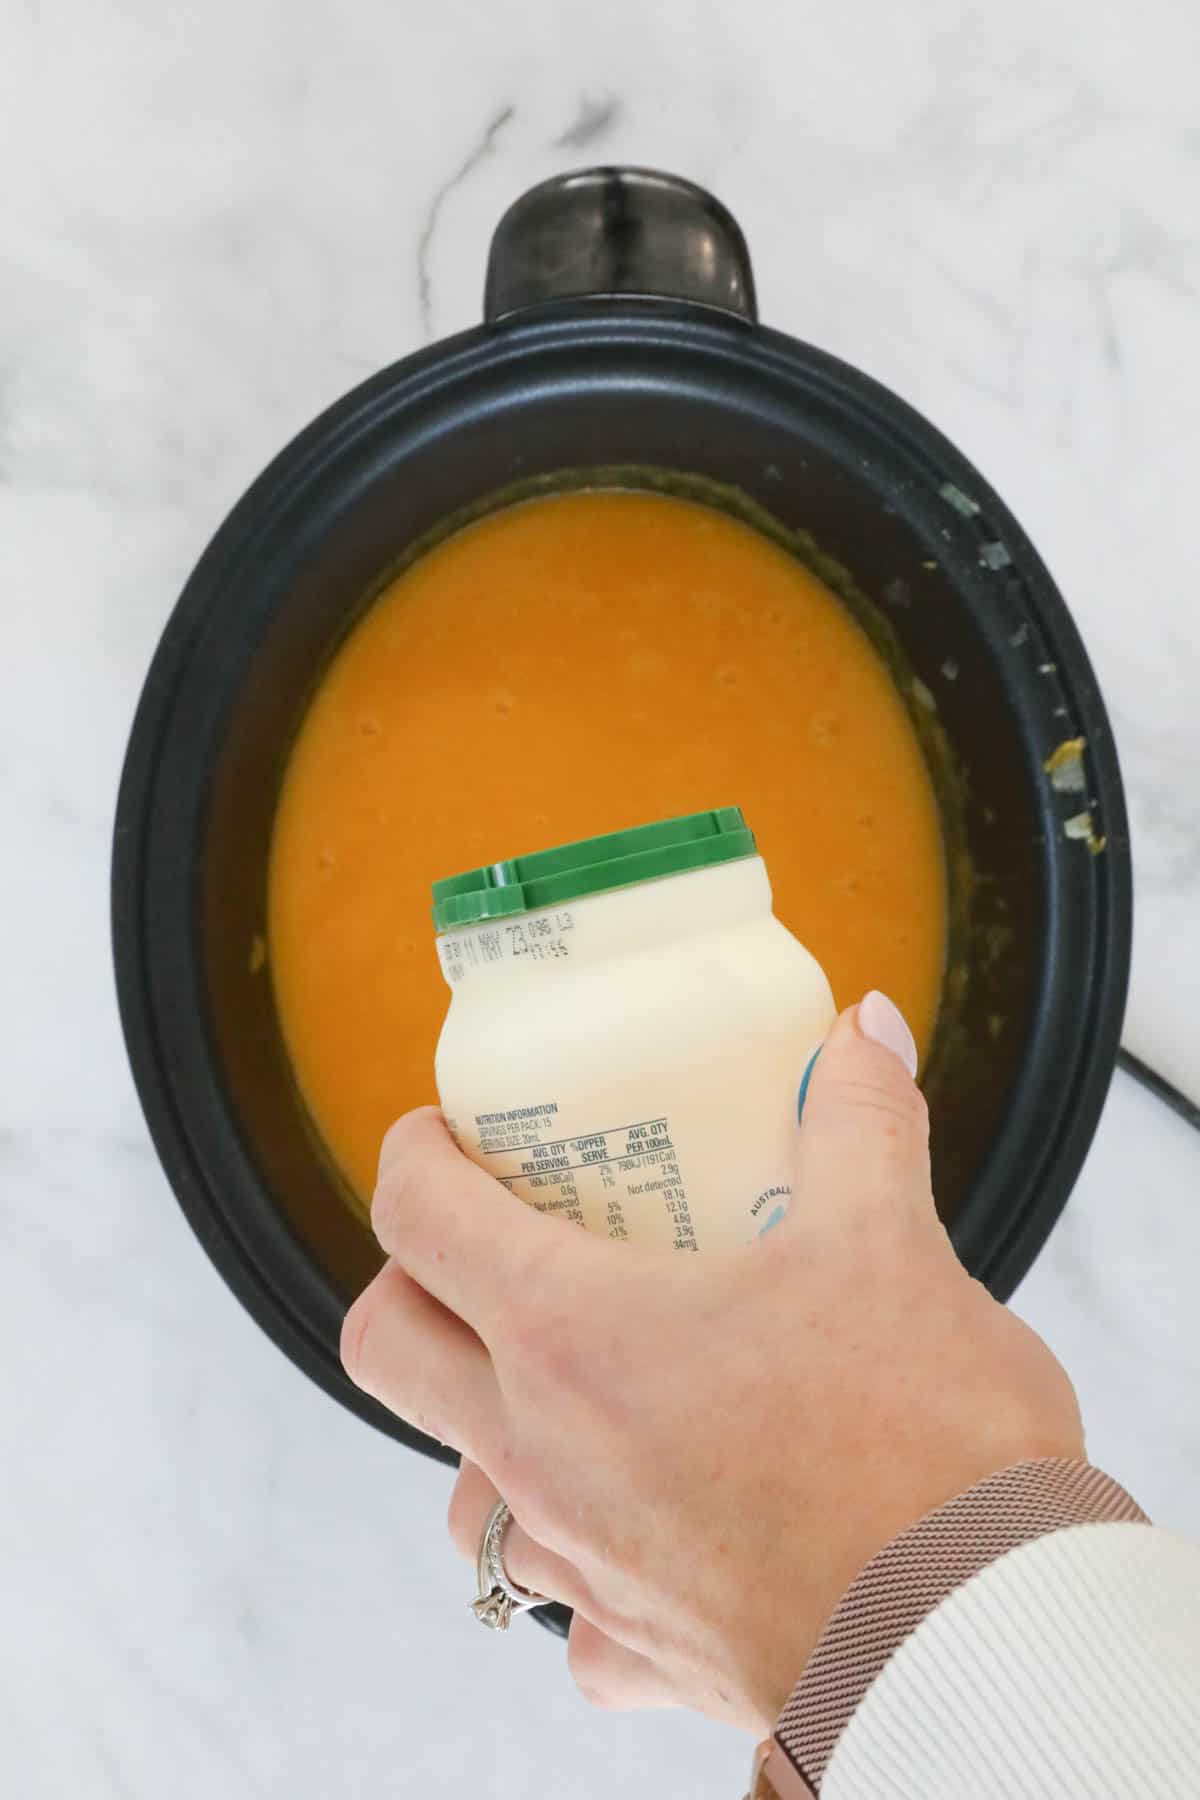 Cream being poured into a crock pot filled with soup.